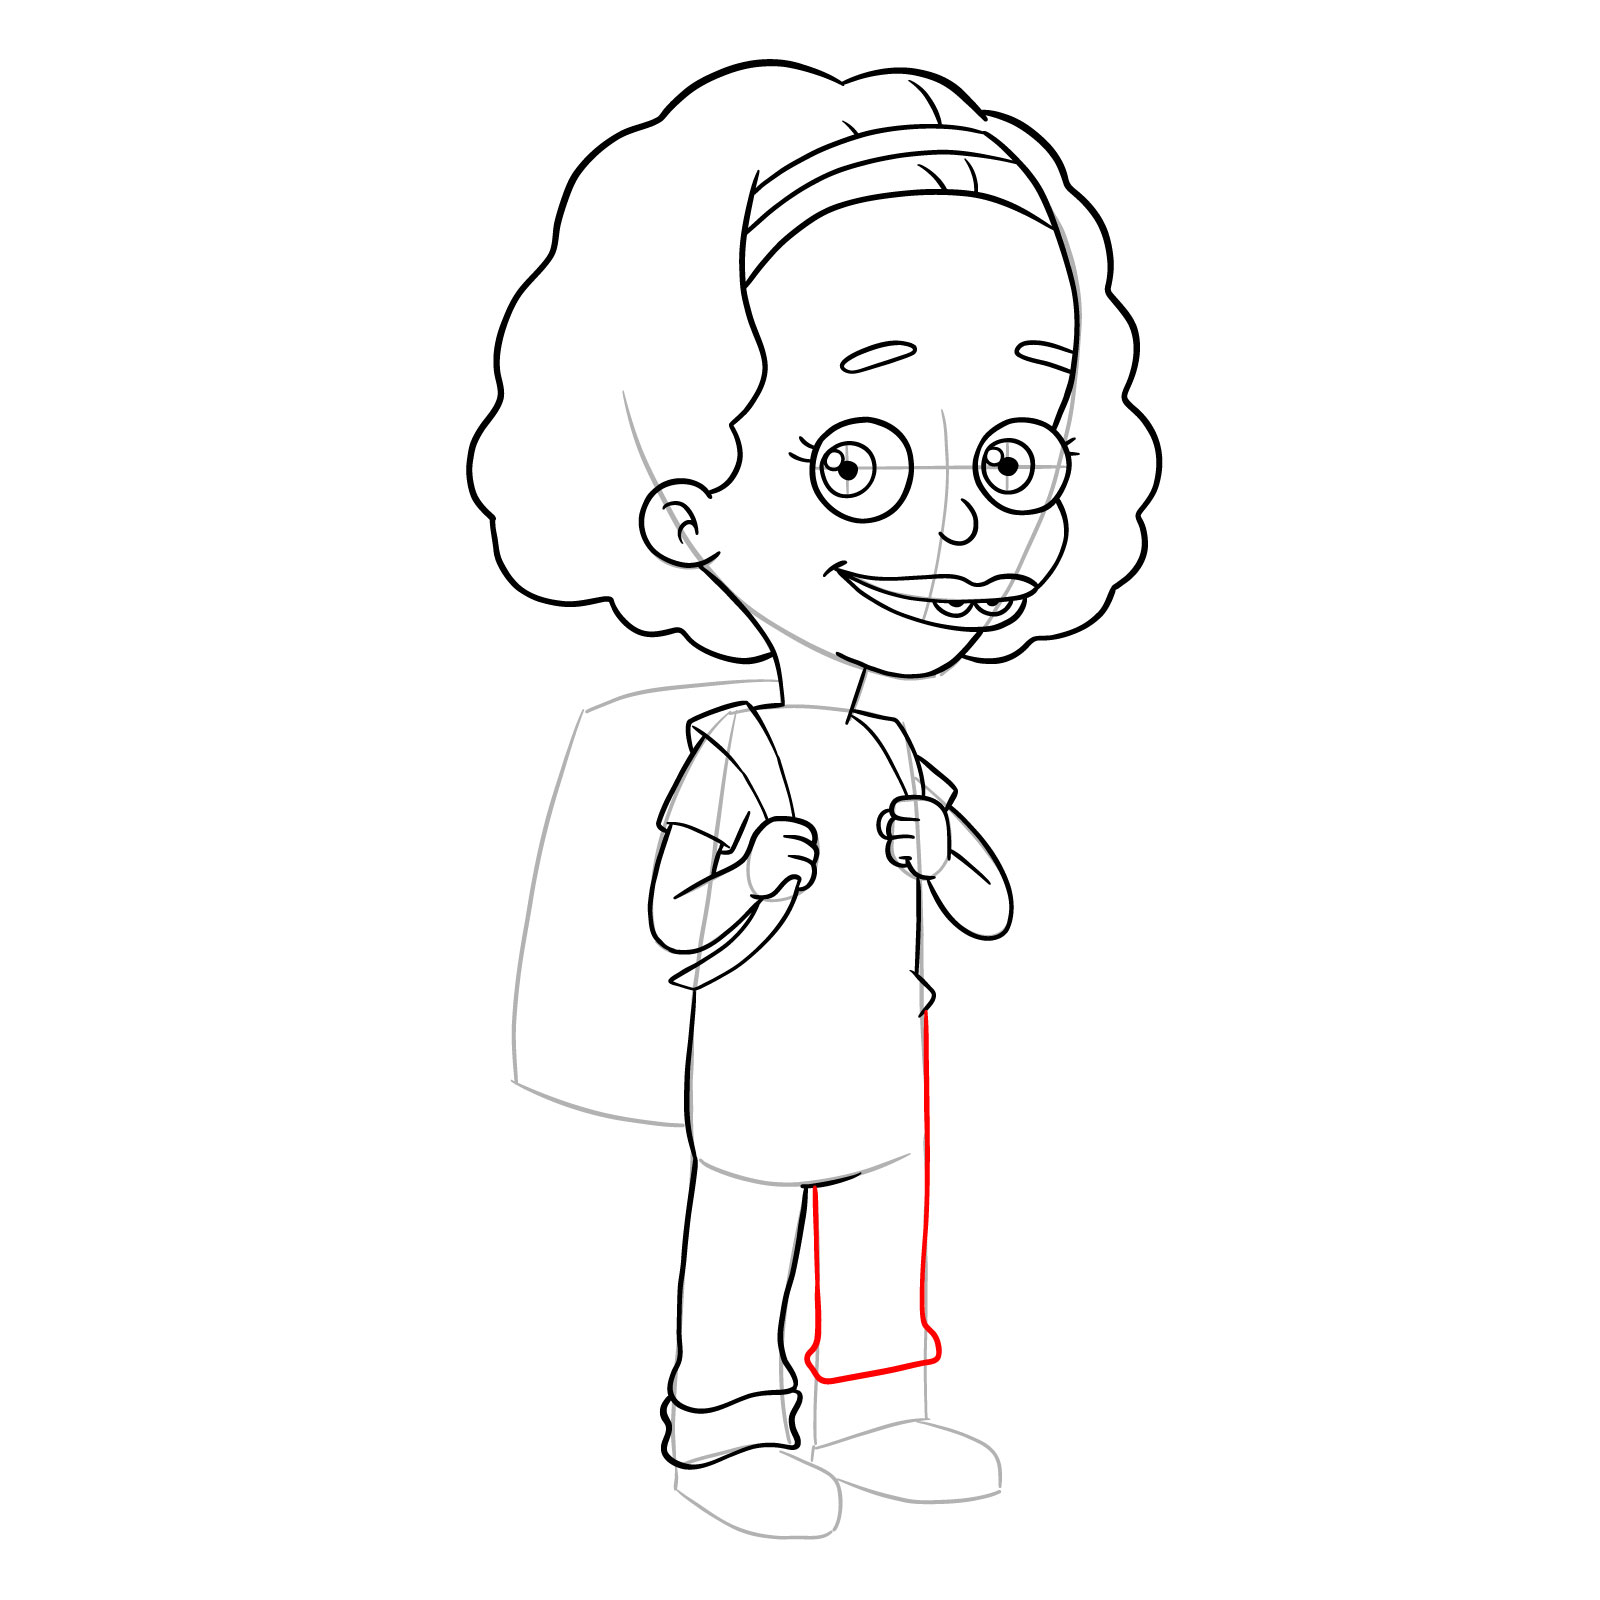 How to draw Missy from Big Mouth - step 21